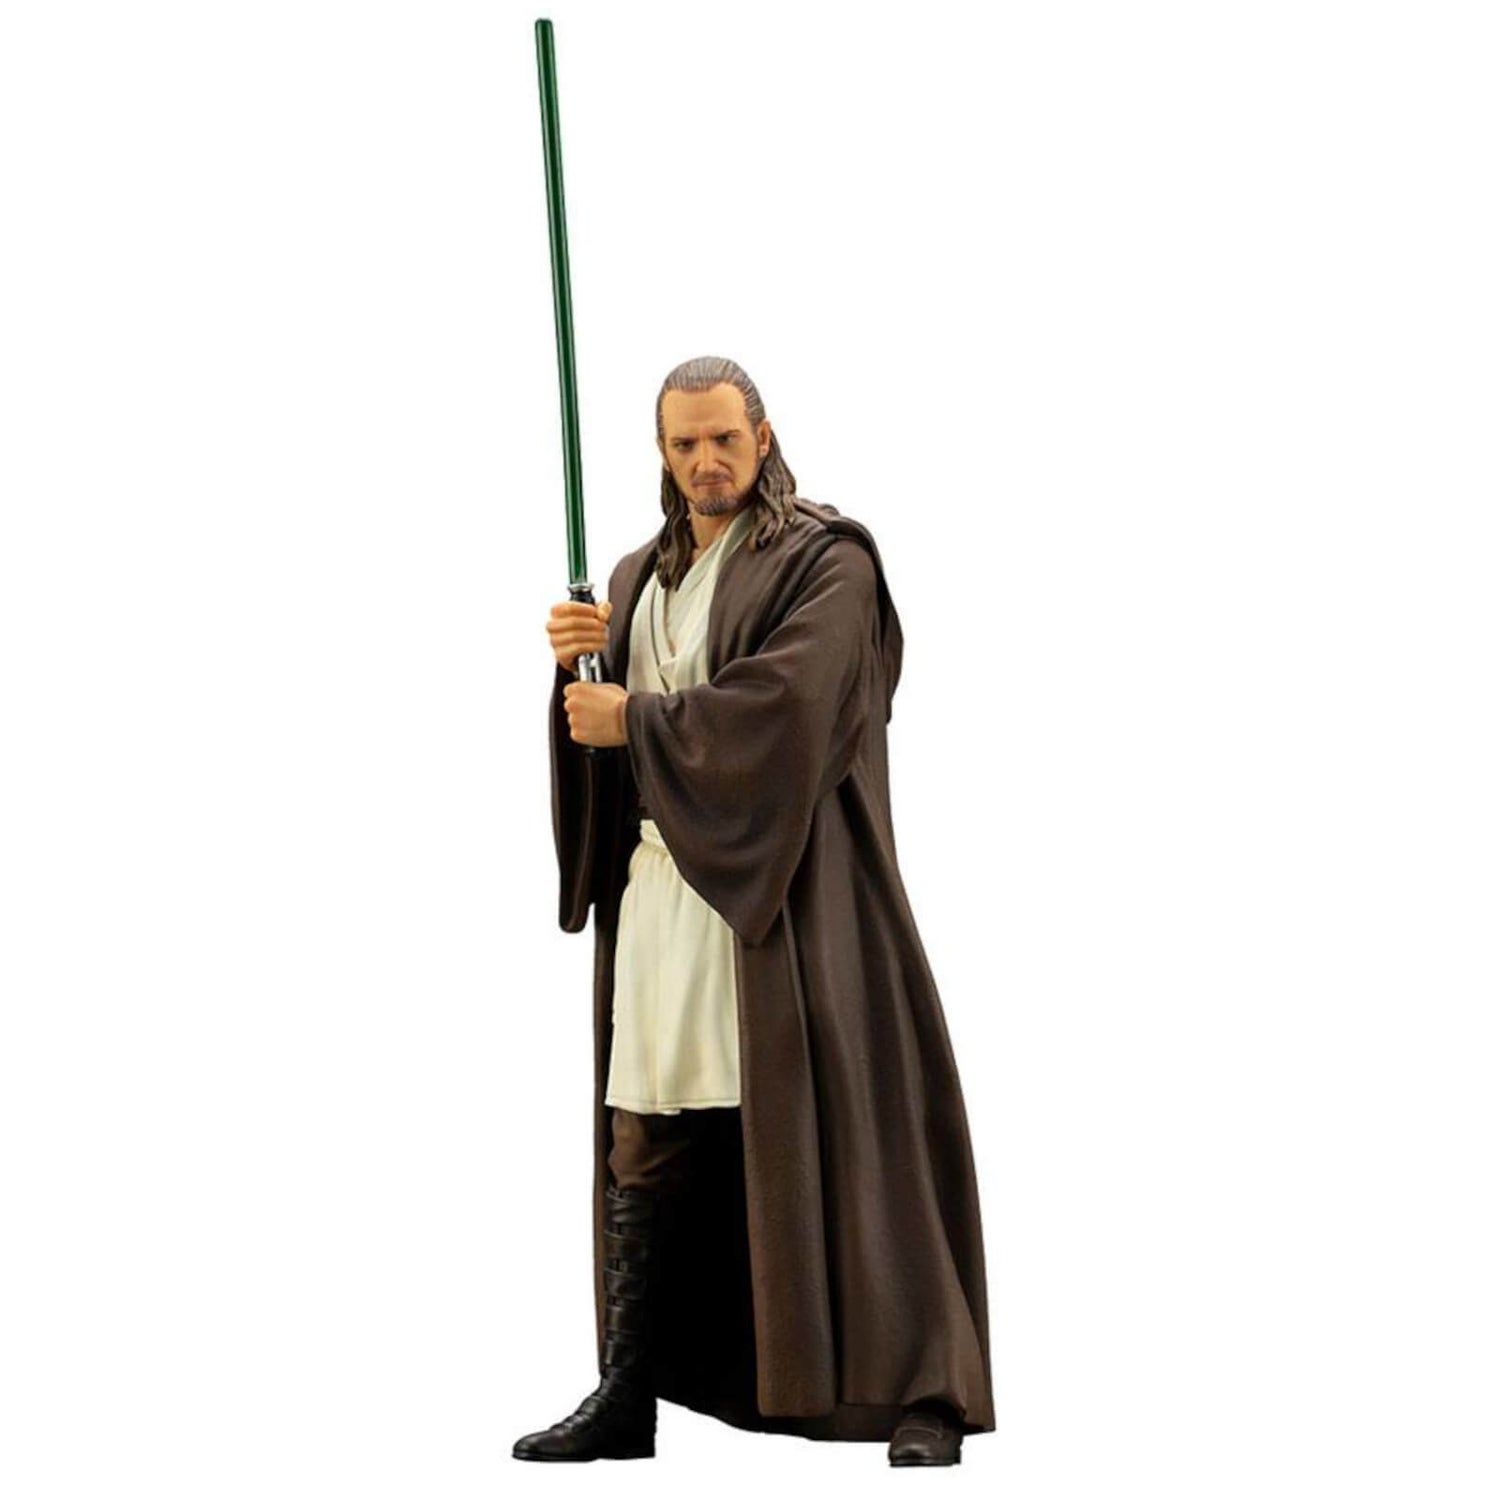 What Lightsaber Form Does Qui-Gon Jinn Use?